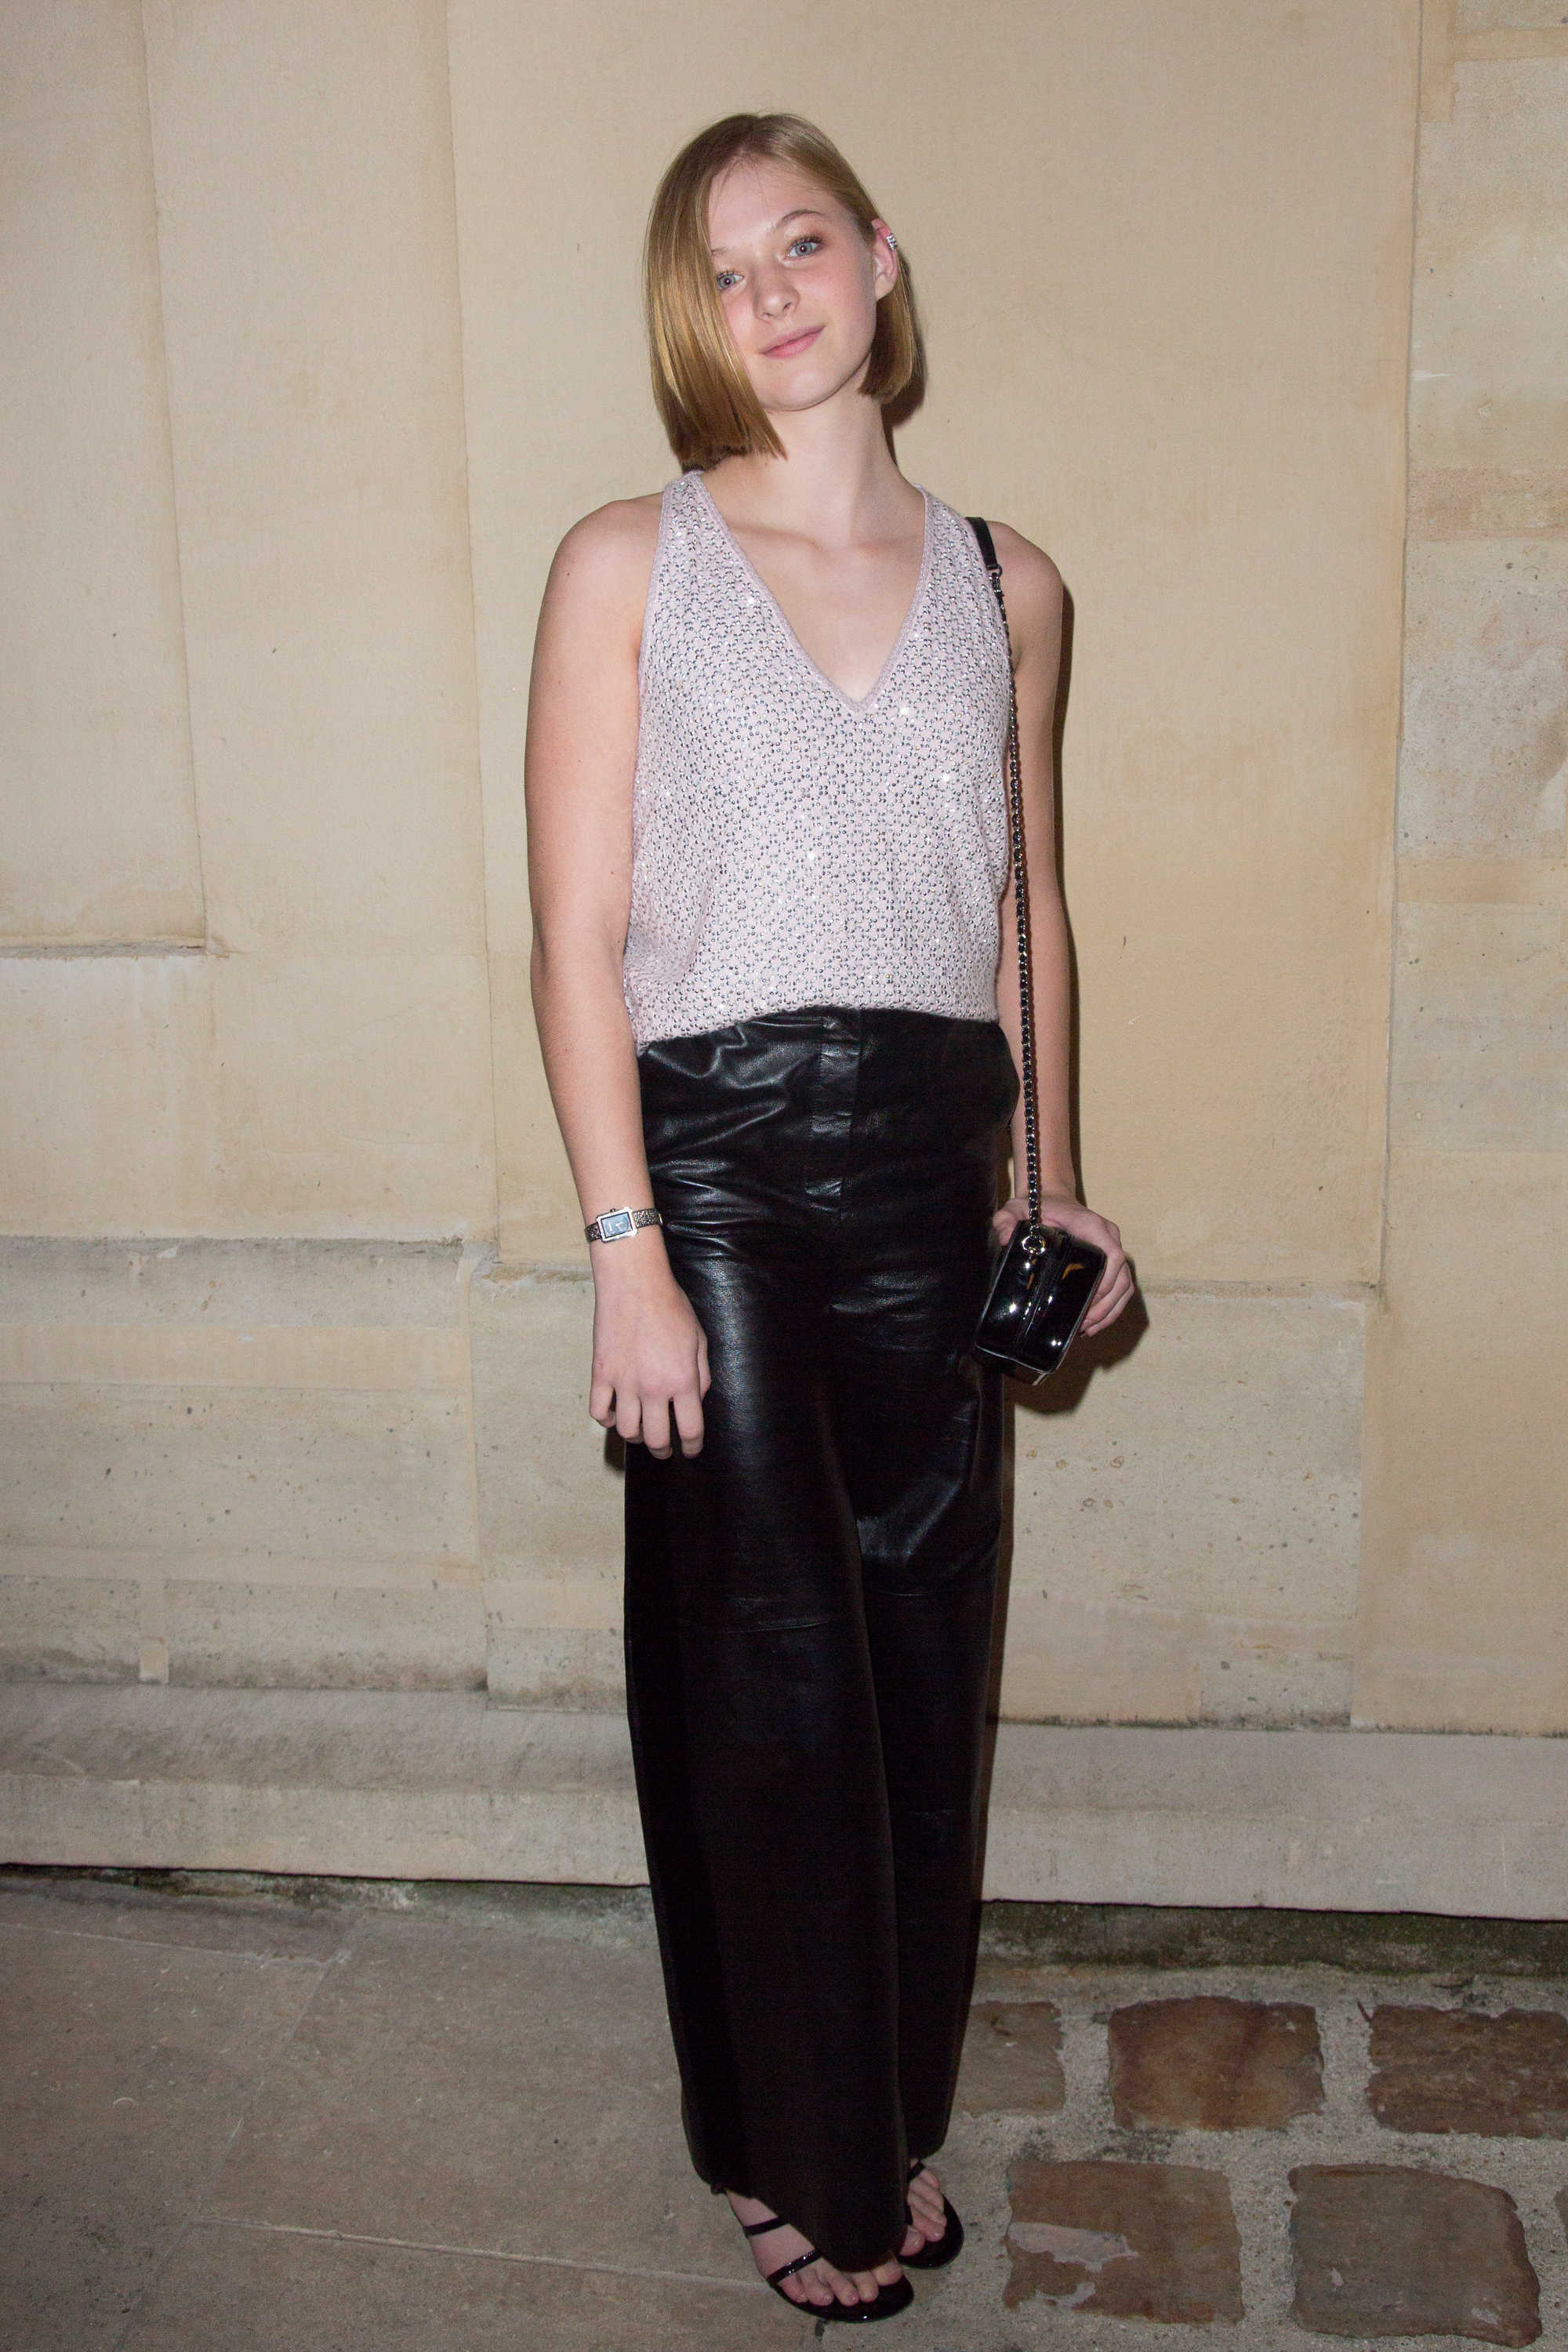 Ekaterina Samsonov at the Chanel ‘Code Coco’ launch party